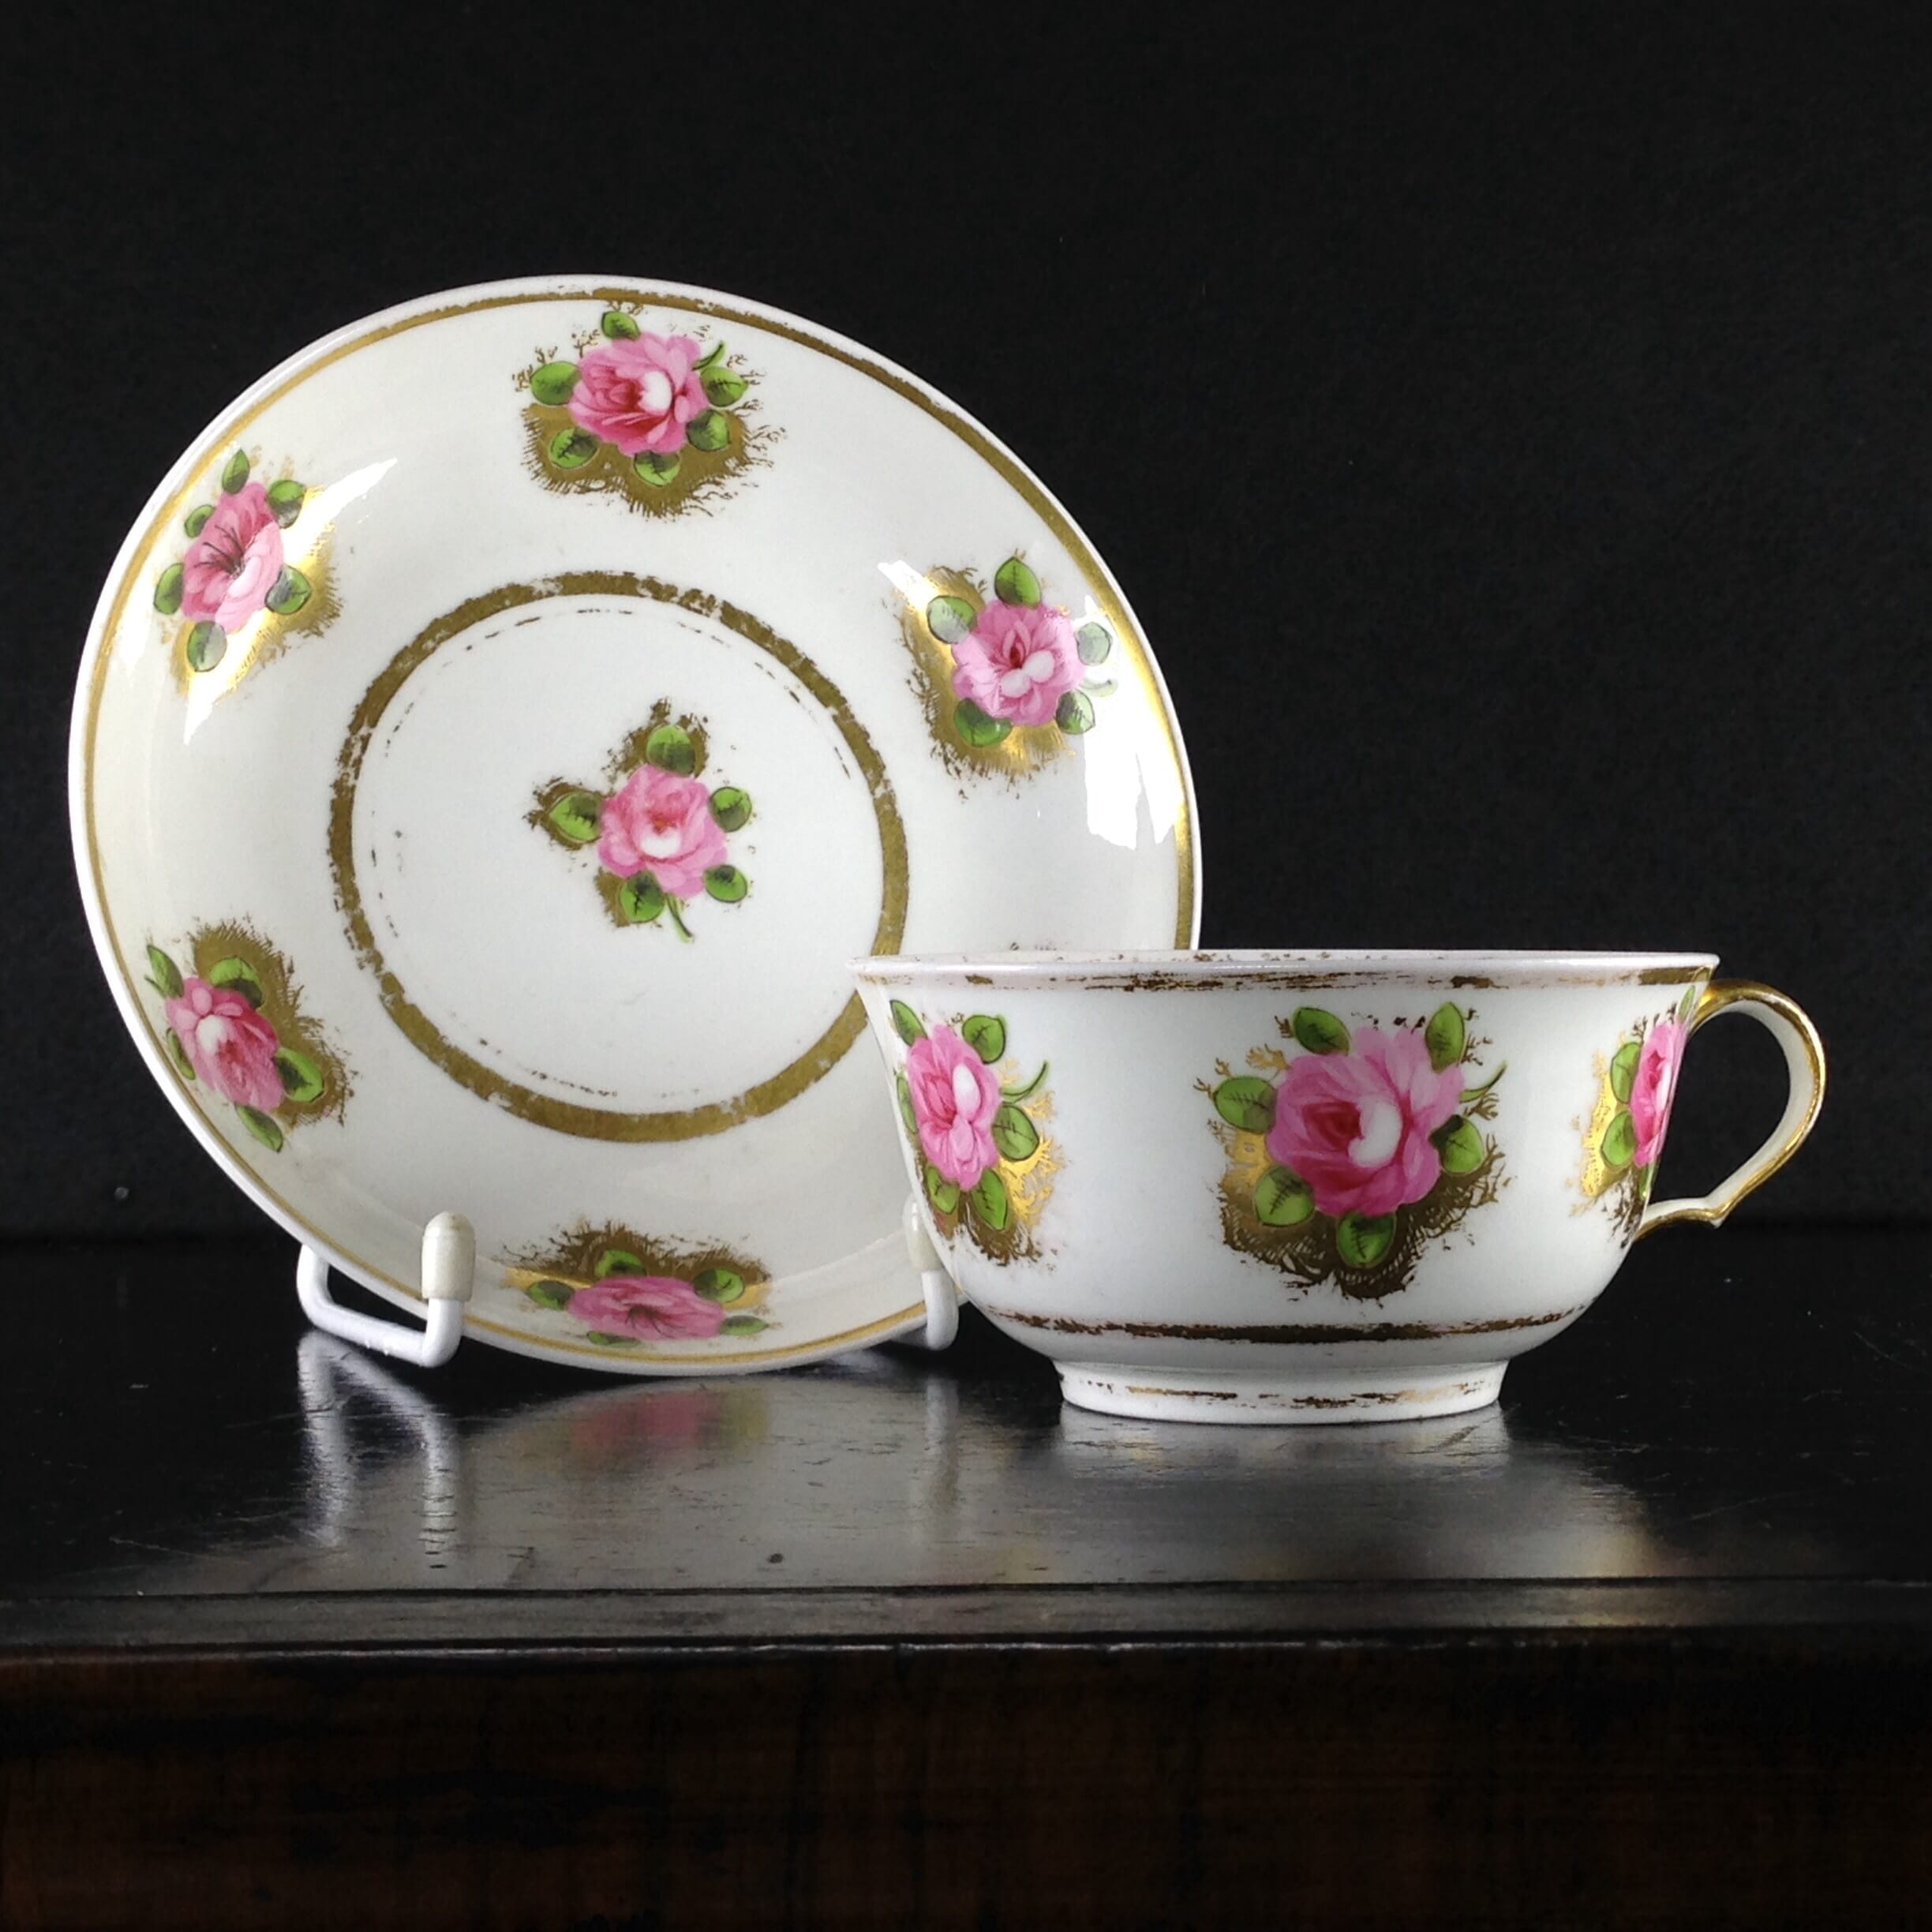 Swansea cup & saucer with rose painting, c. 1820. -0